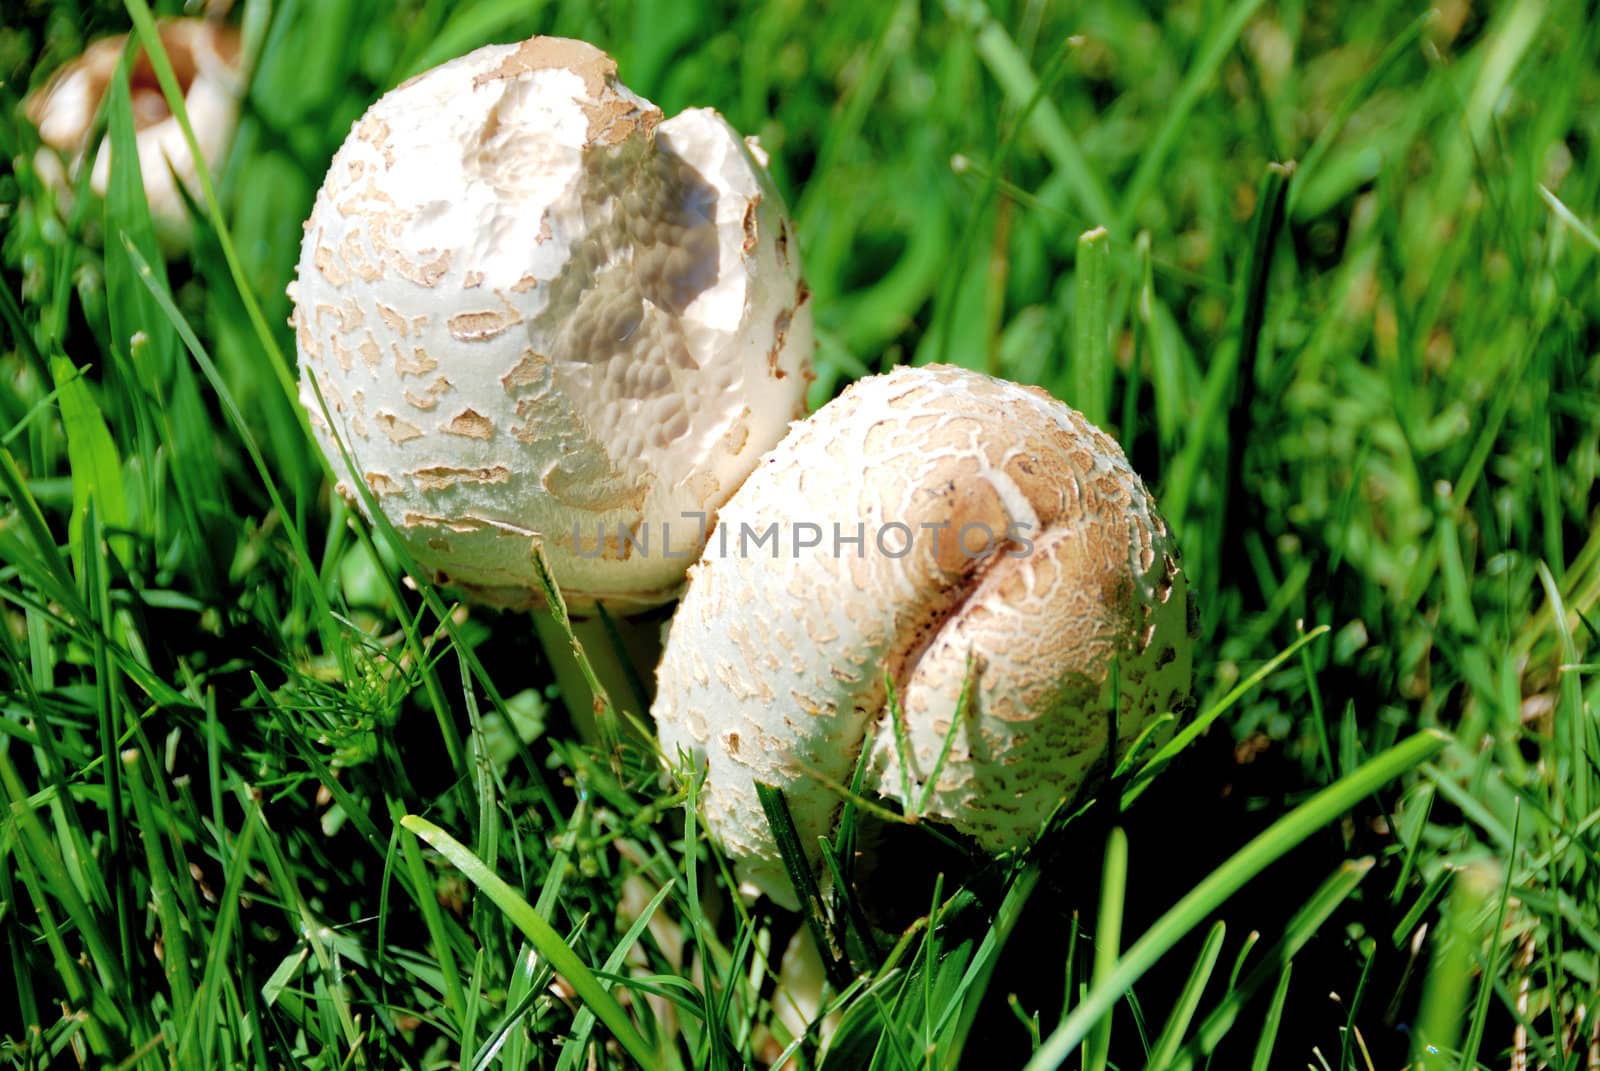 Two White Mushrooms in Green Grass